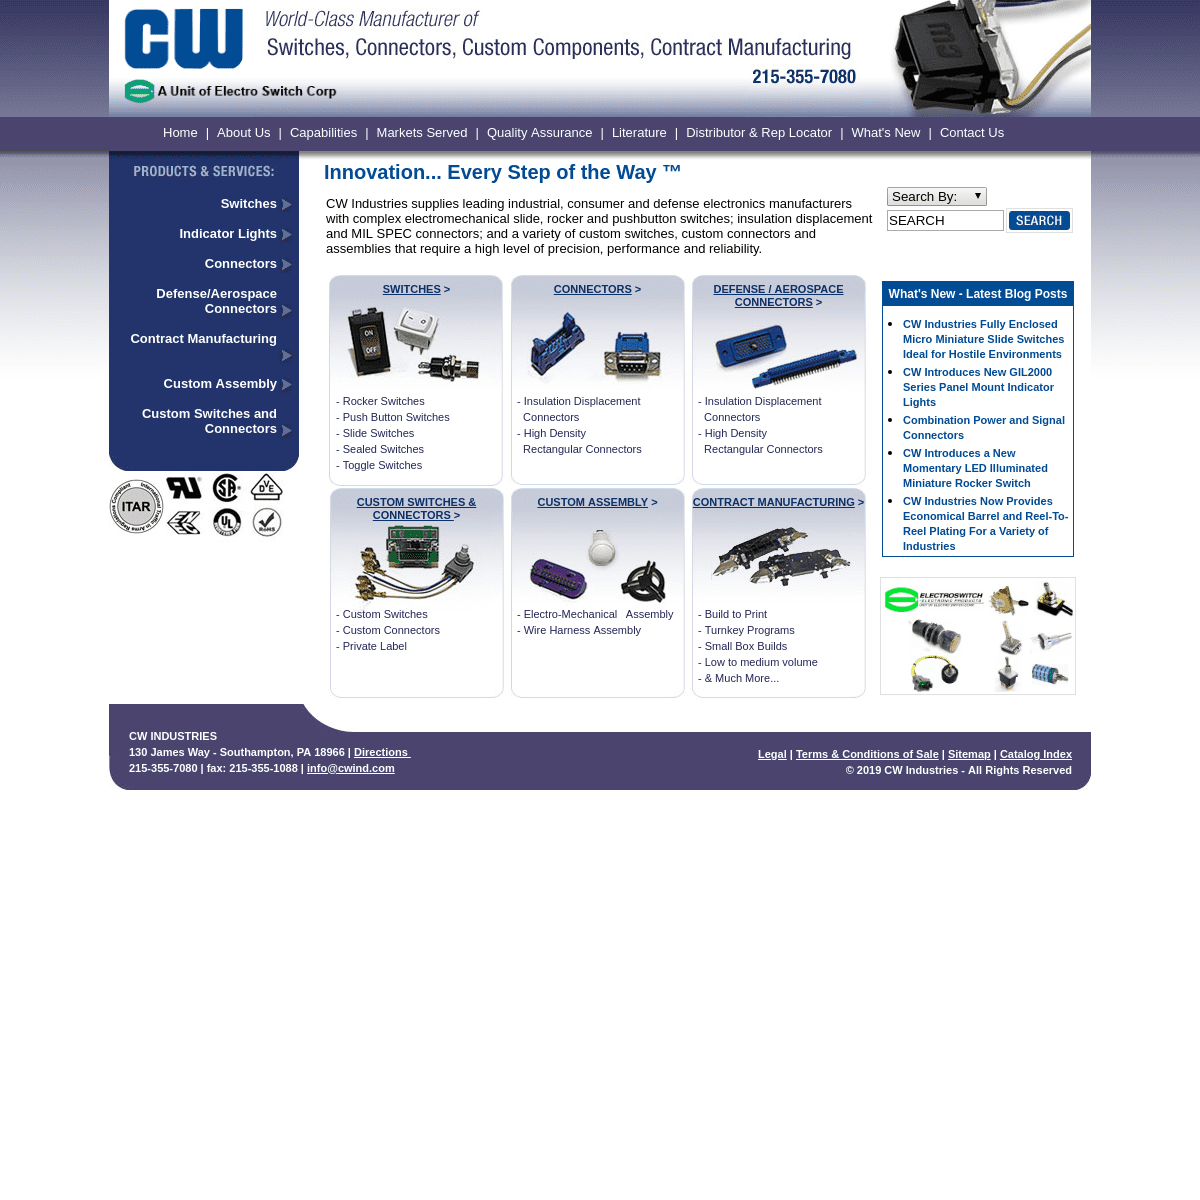 Rocker,Sealed,Push Button,Slide & Custom Switches | Military,High Density,IDC & Custom Connectors - CW Industries